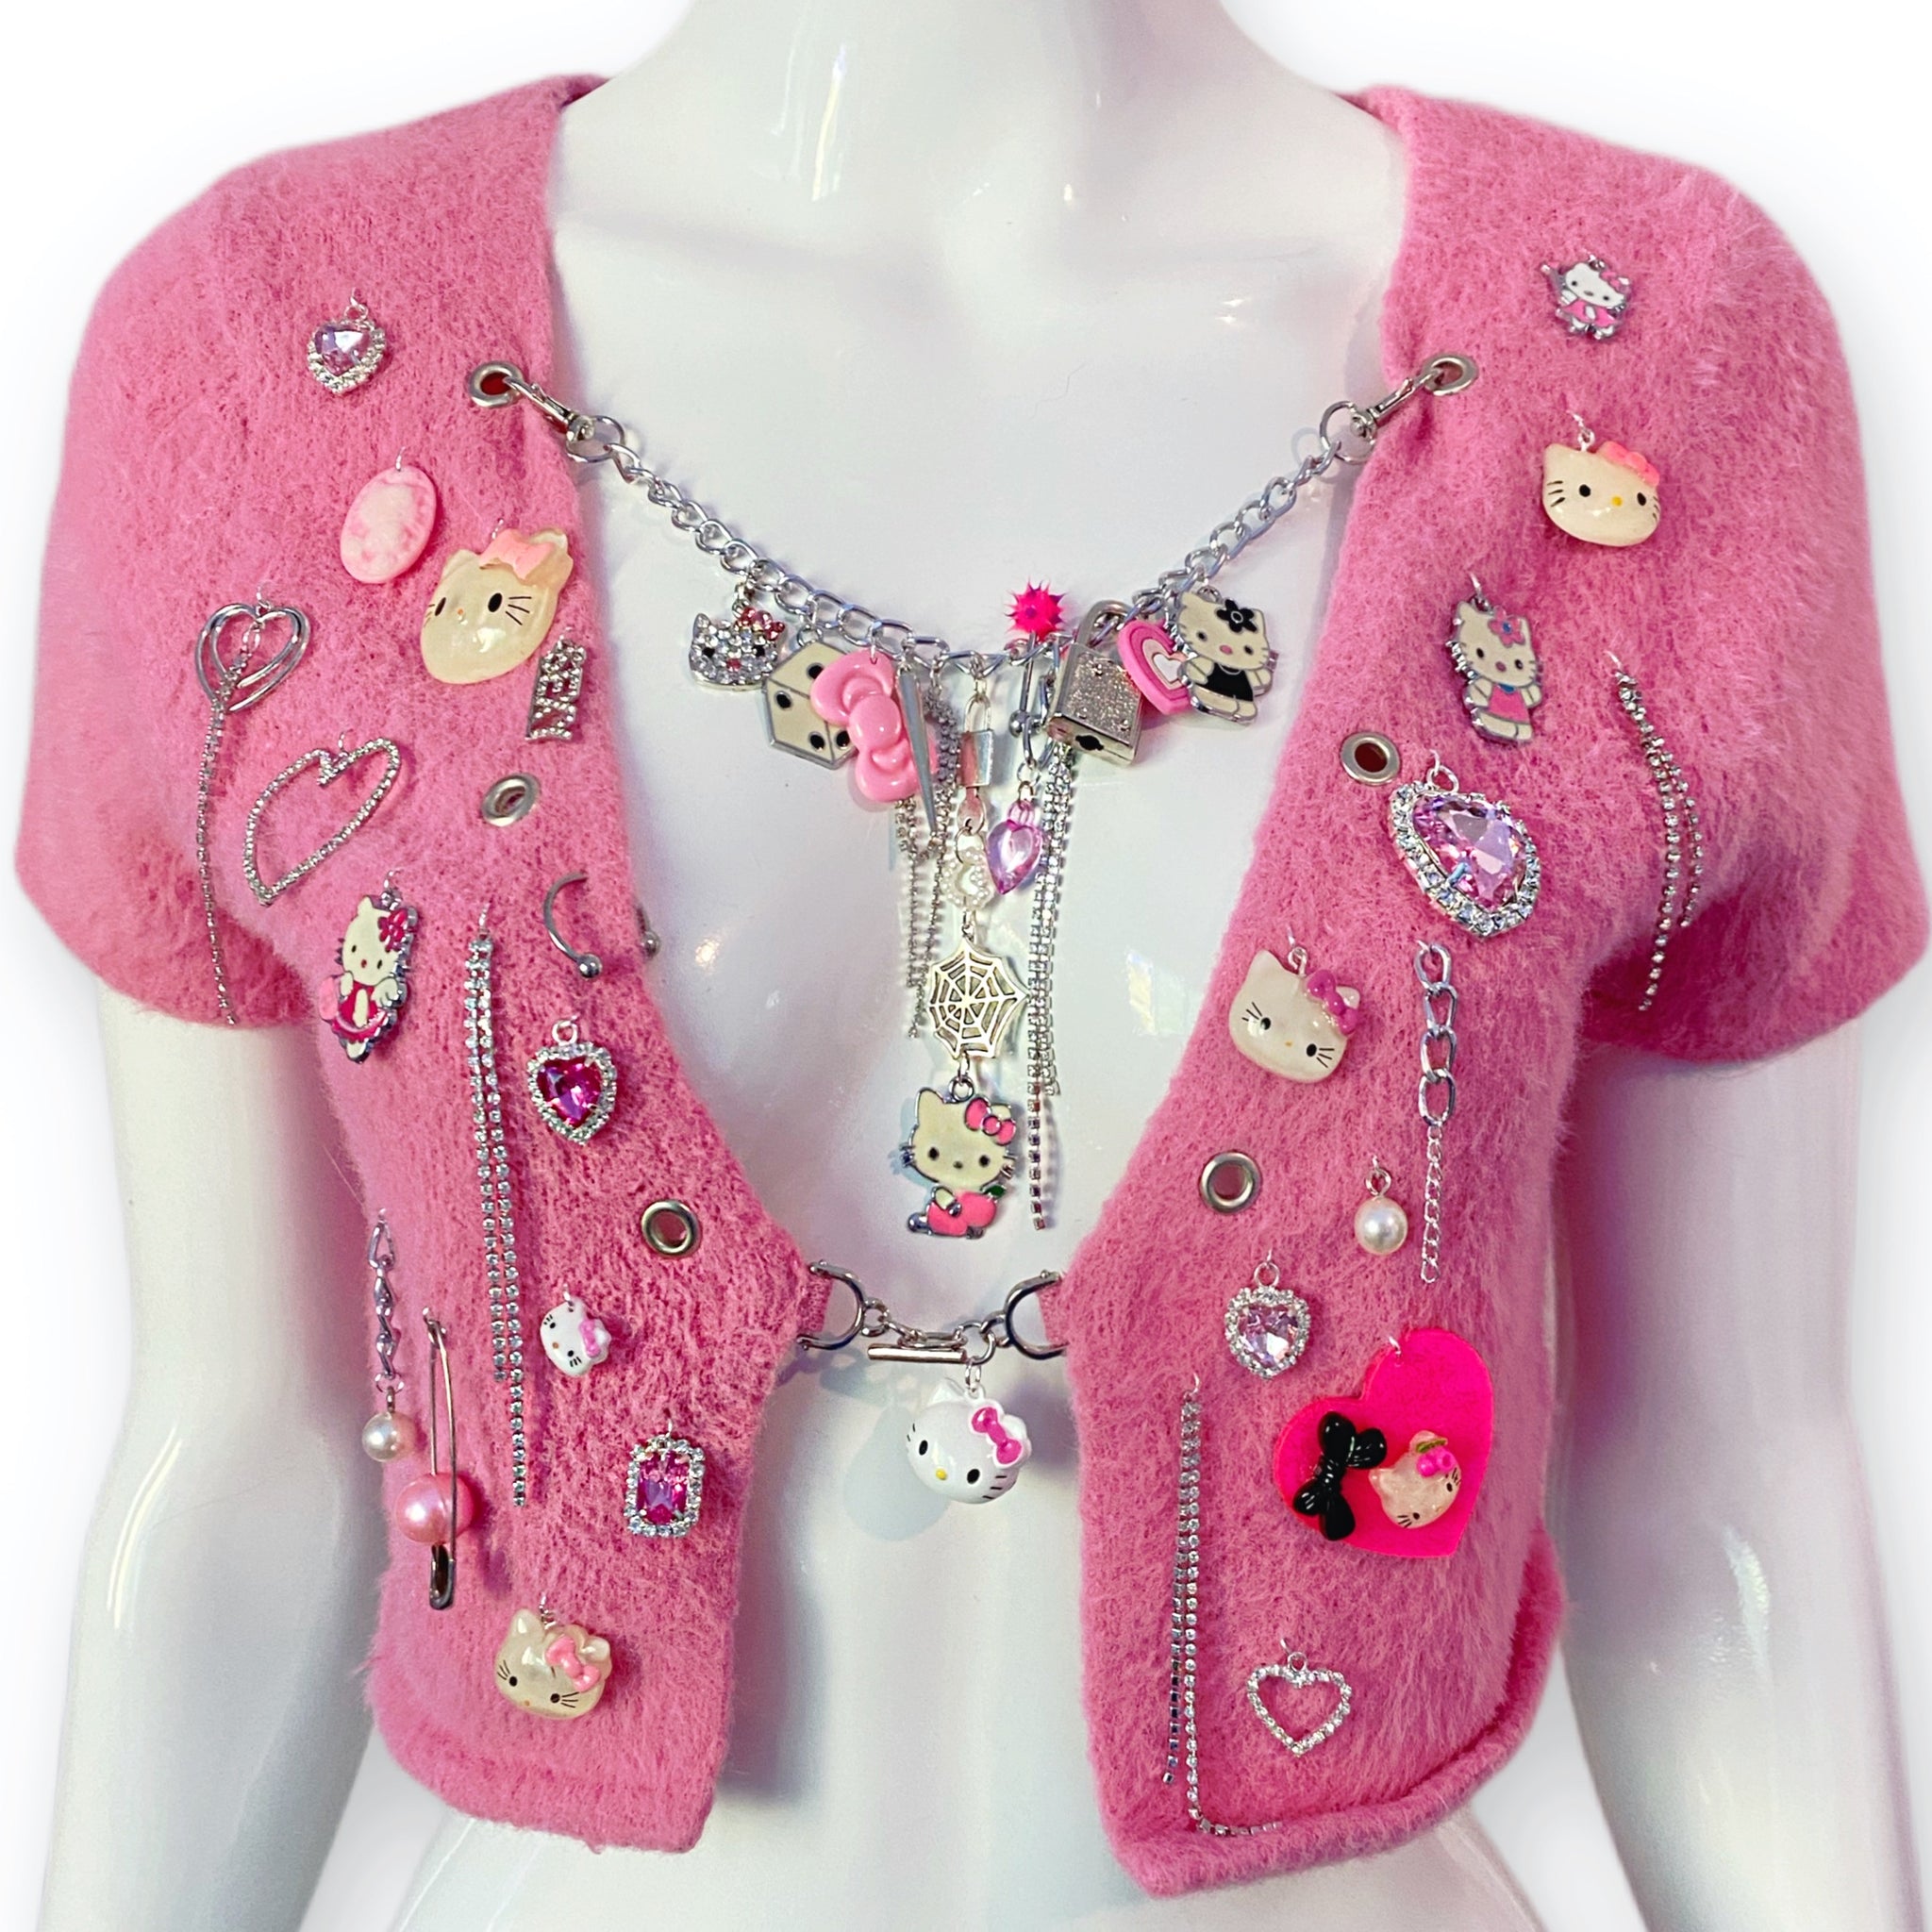 SMALL 1-OFF HELLO KITTY CHARM TOP